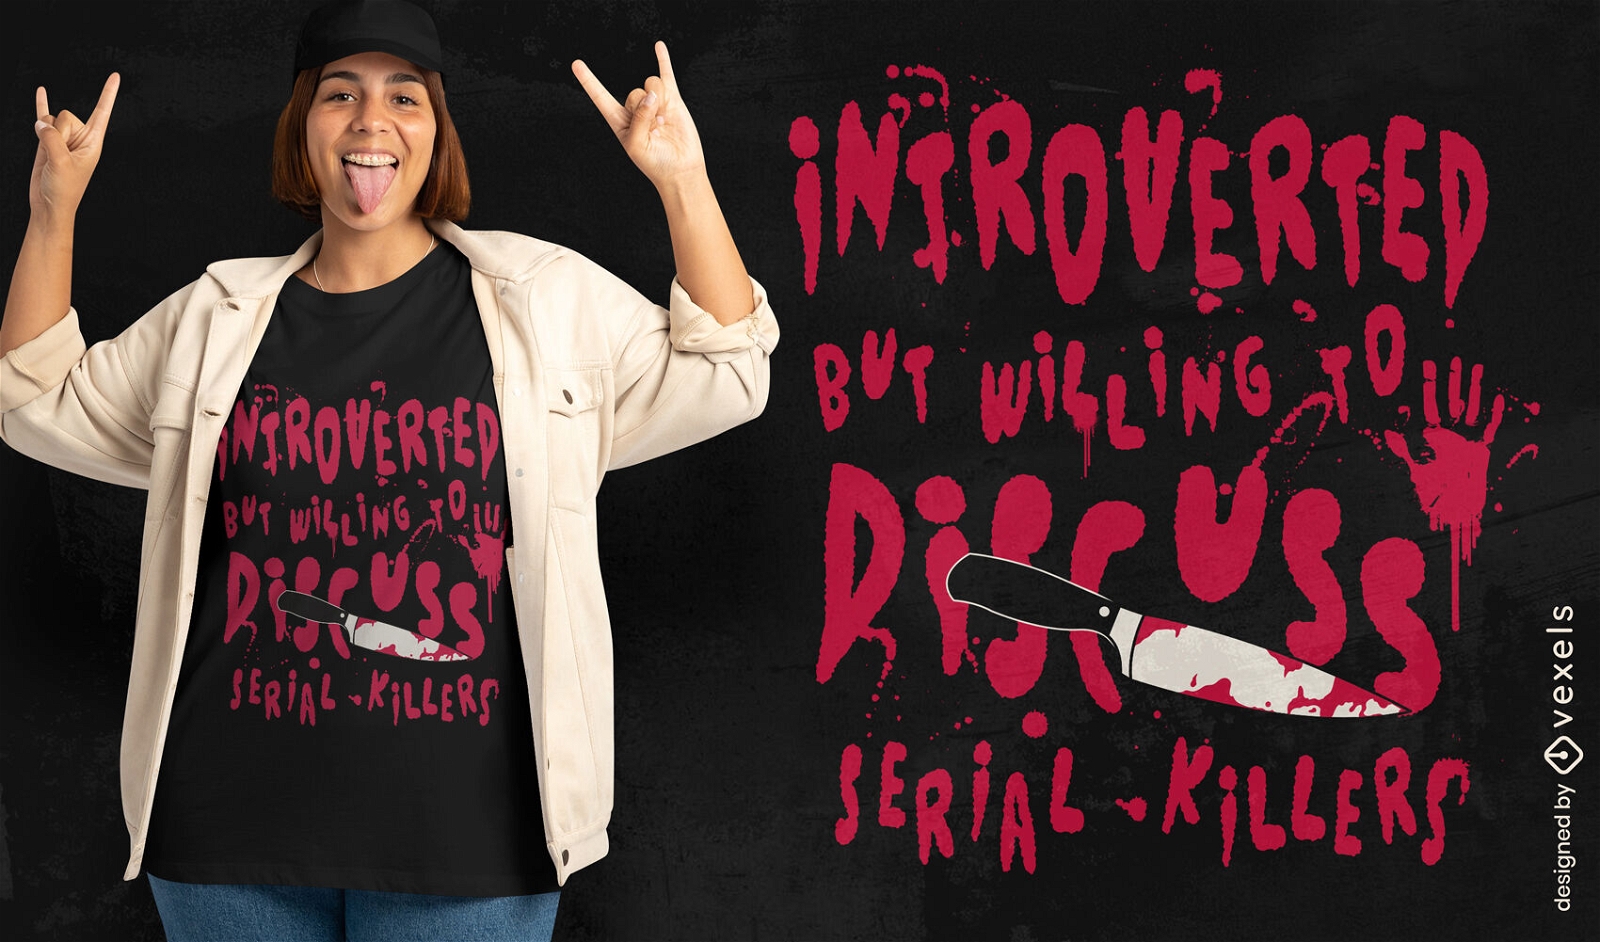 Funny killer blooody quote t-shirt design